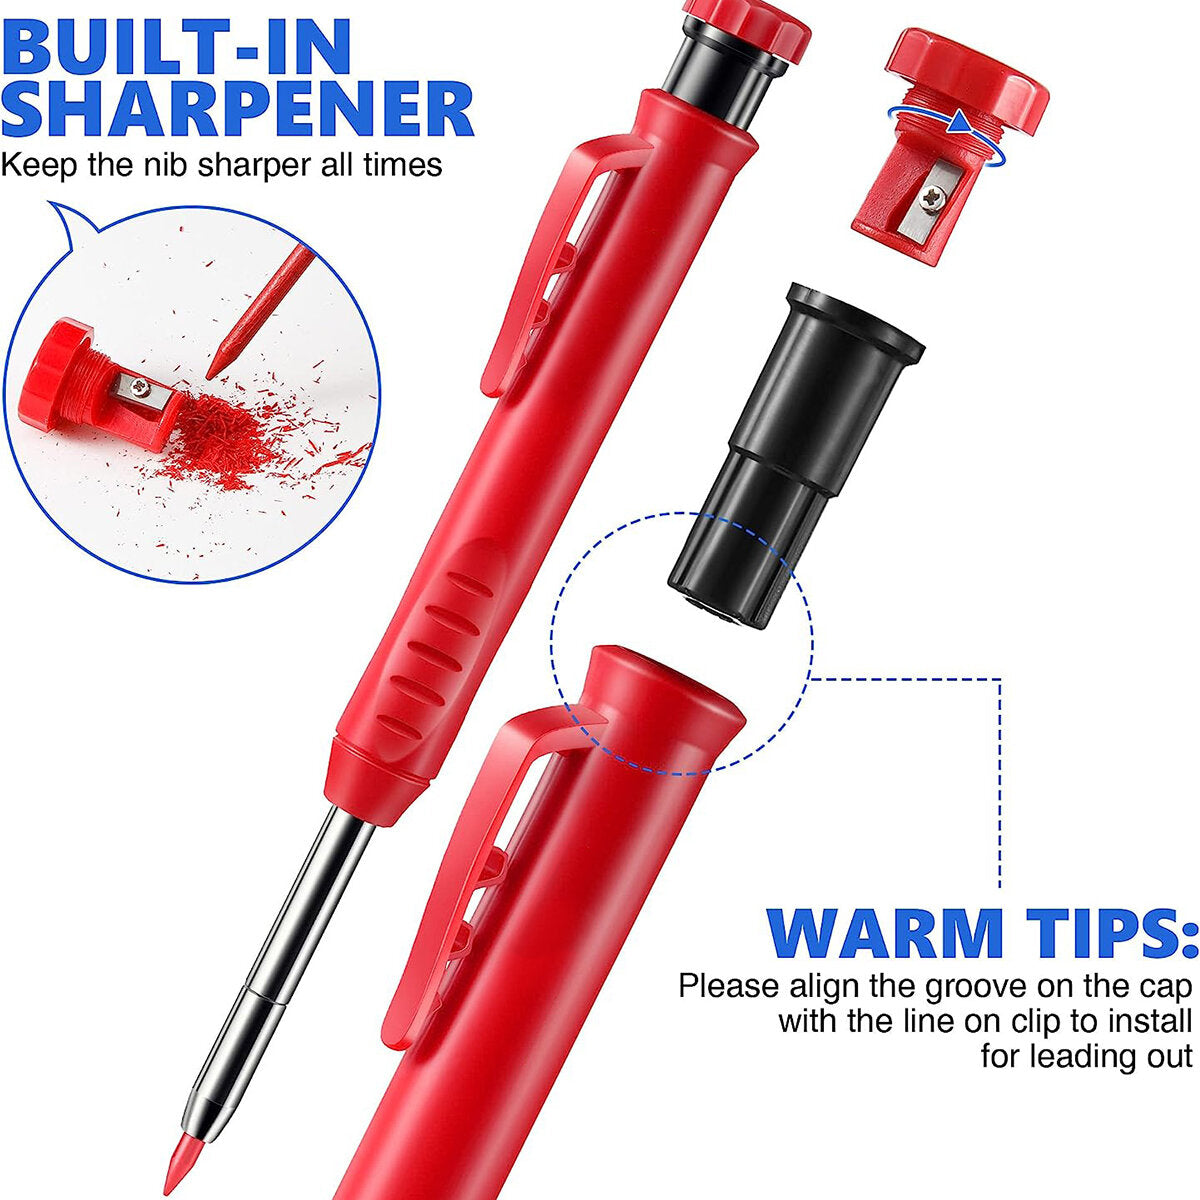 TAIMIMEI 1 Set Carpenter Pencils Set With Automatic Center Punch Scriber Marking Tools Carbide Scribe Tool 3 Mechanical Carpenter Pencils With Sharpener And 18 Refills For Construction Woodworking